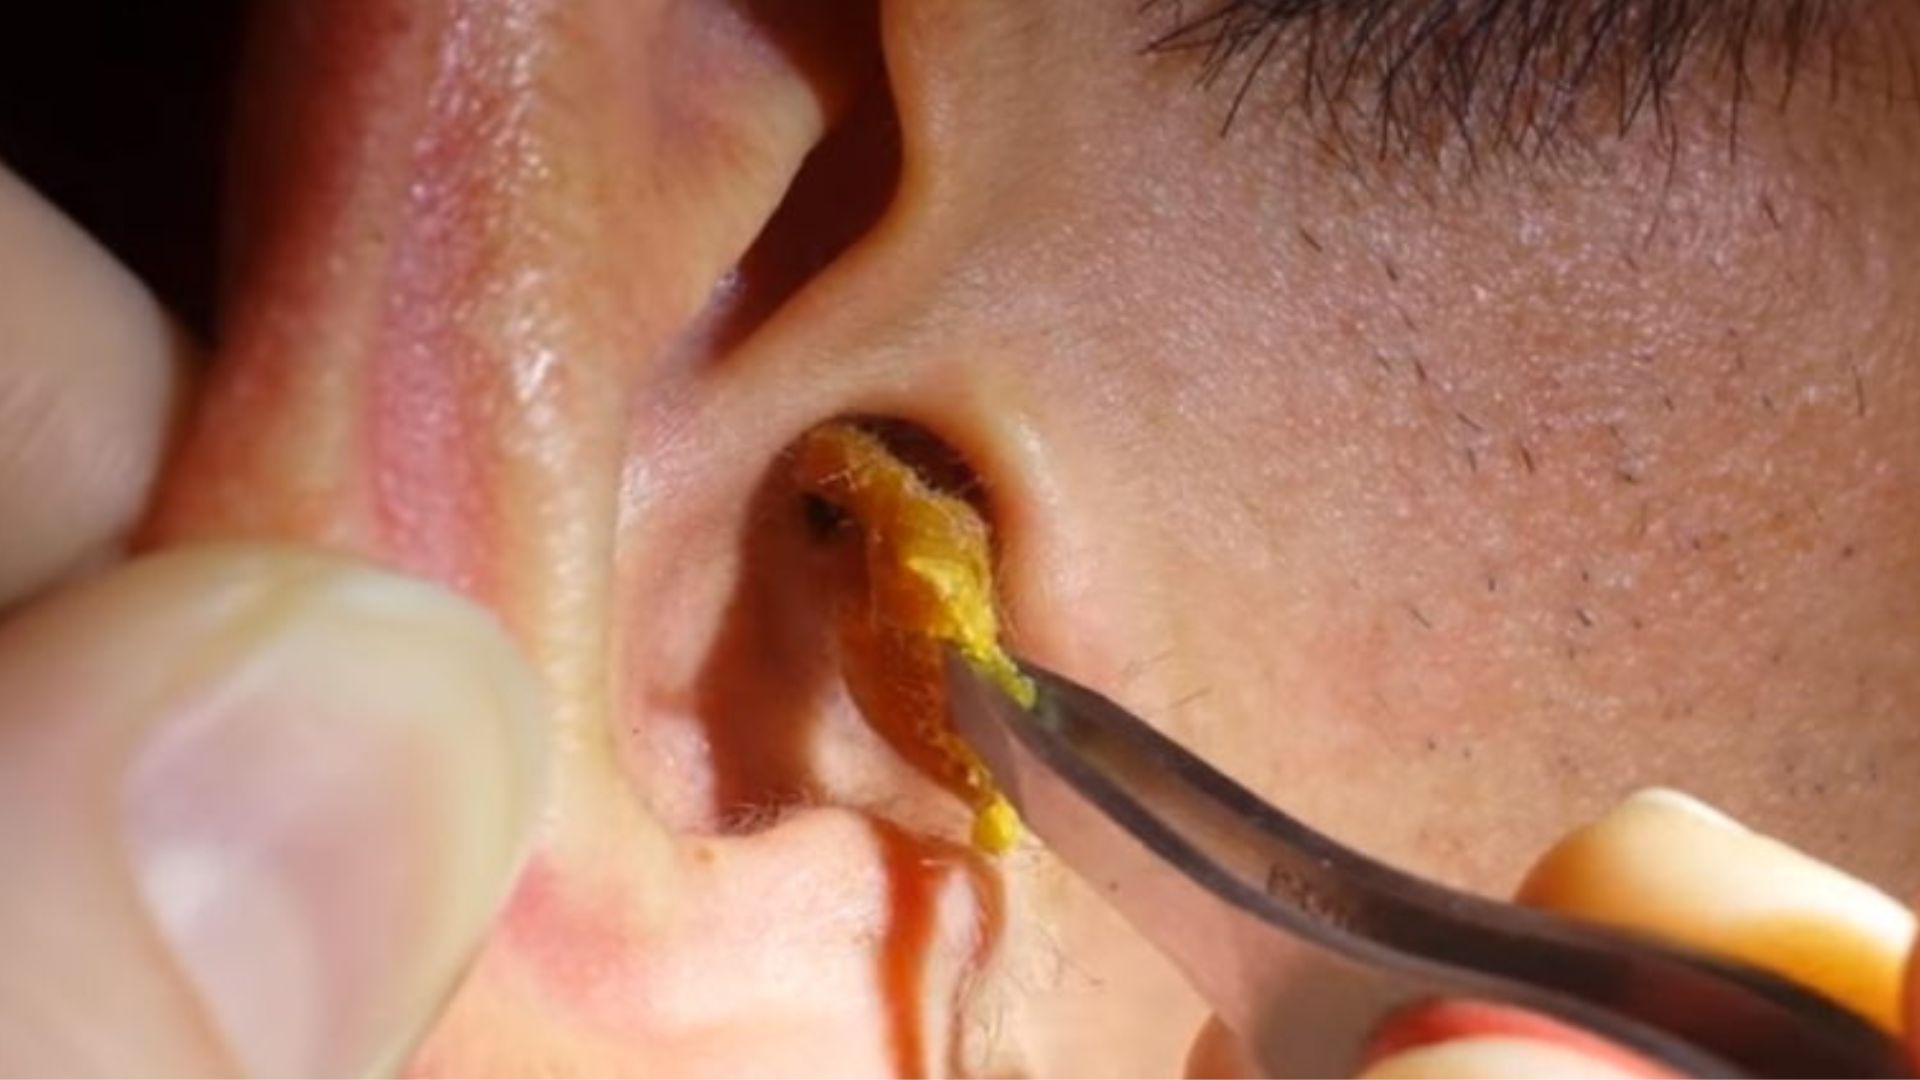 Dream About Earwax - Symbolize A Need To Cleanse One's Mind